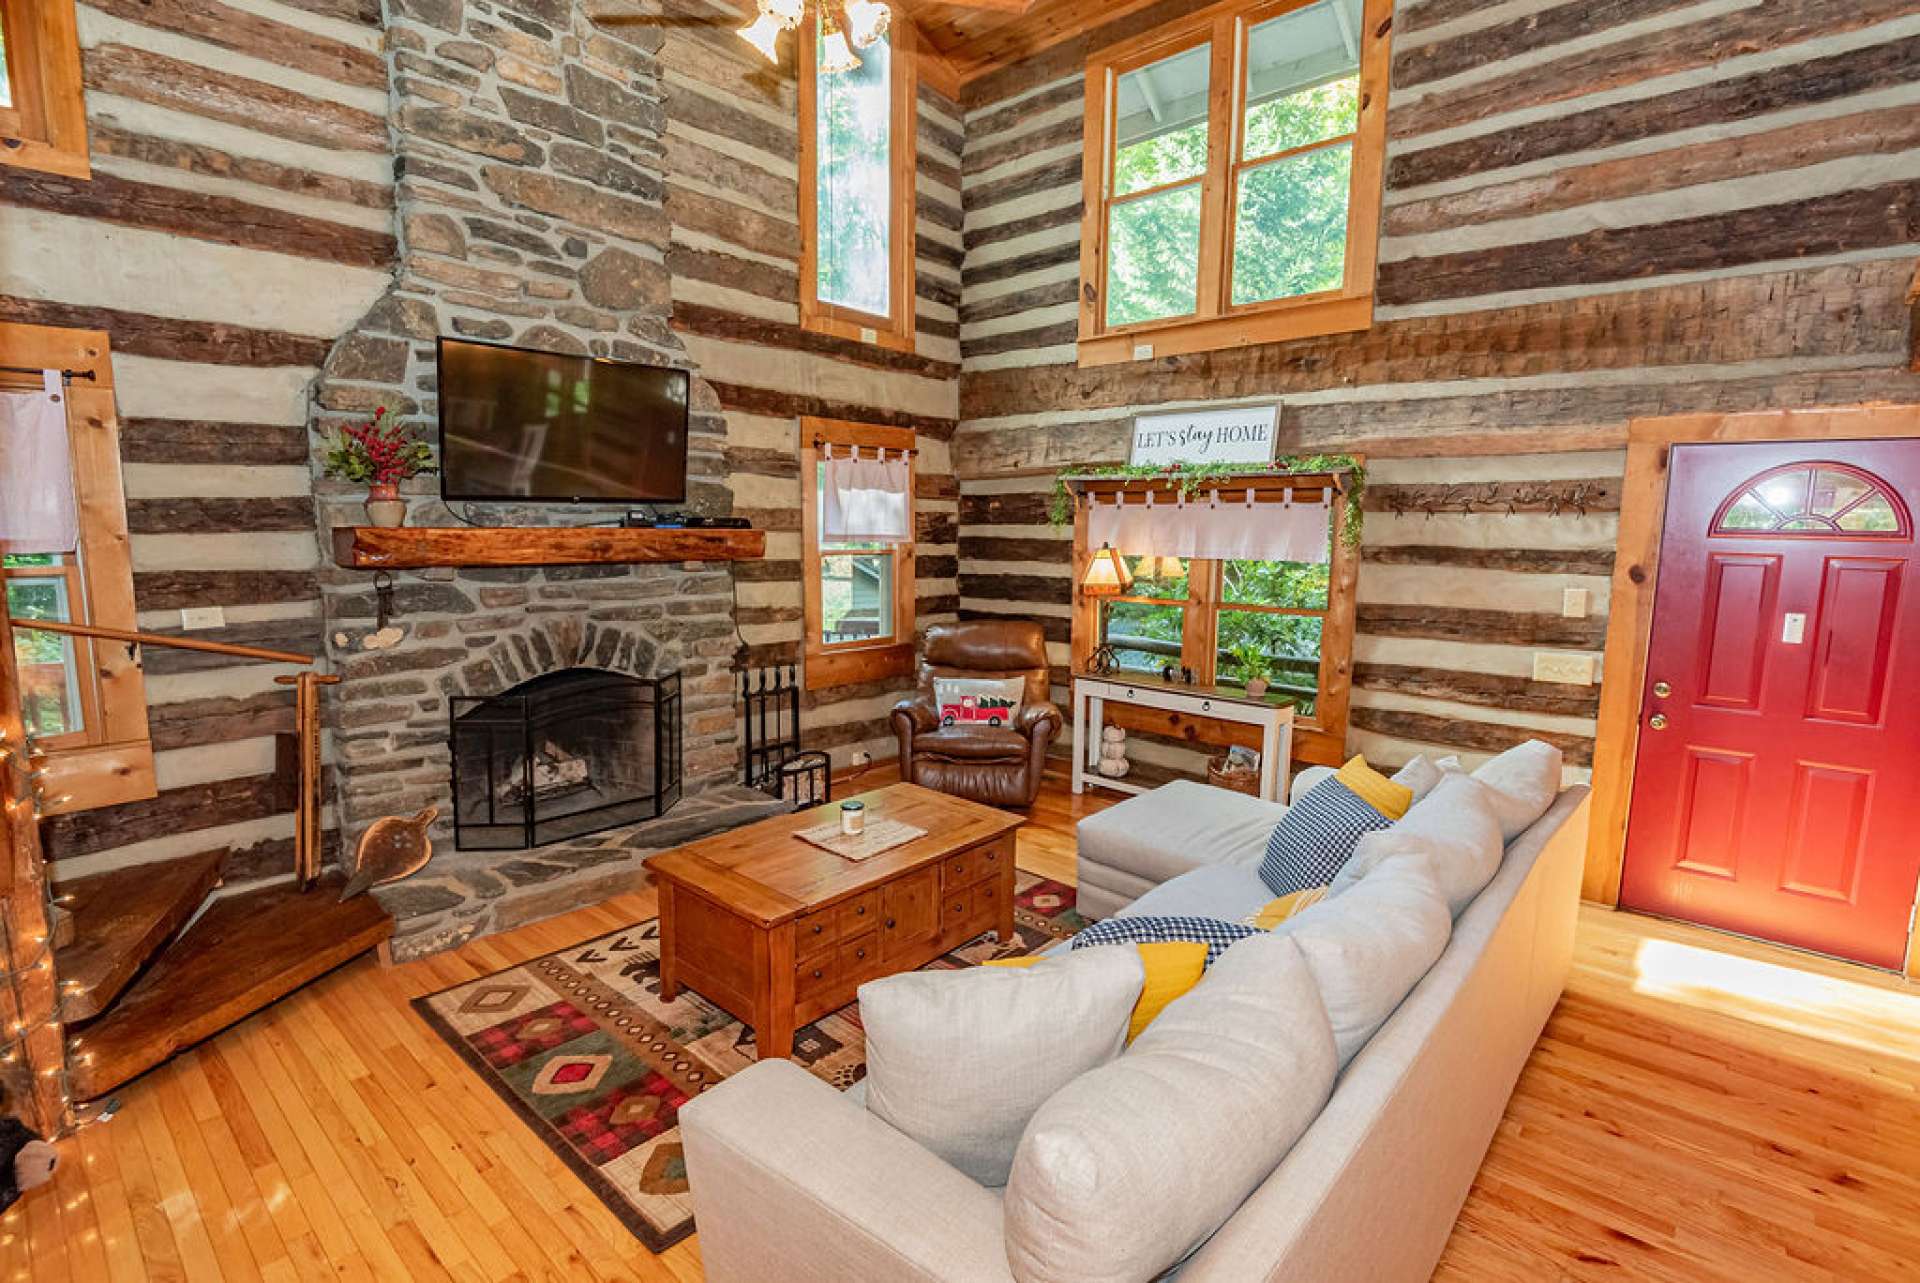 Spend your evenings in front of this massive fireplace with a crackling fire while enjoying conversations with your family on cool winter evenings.